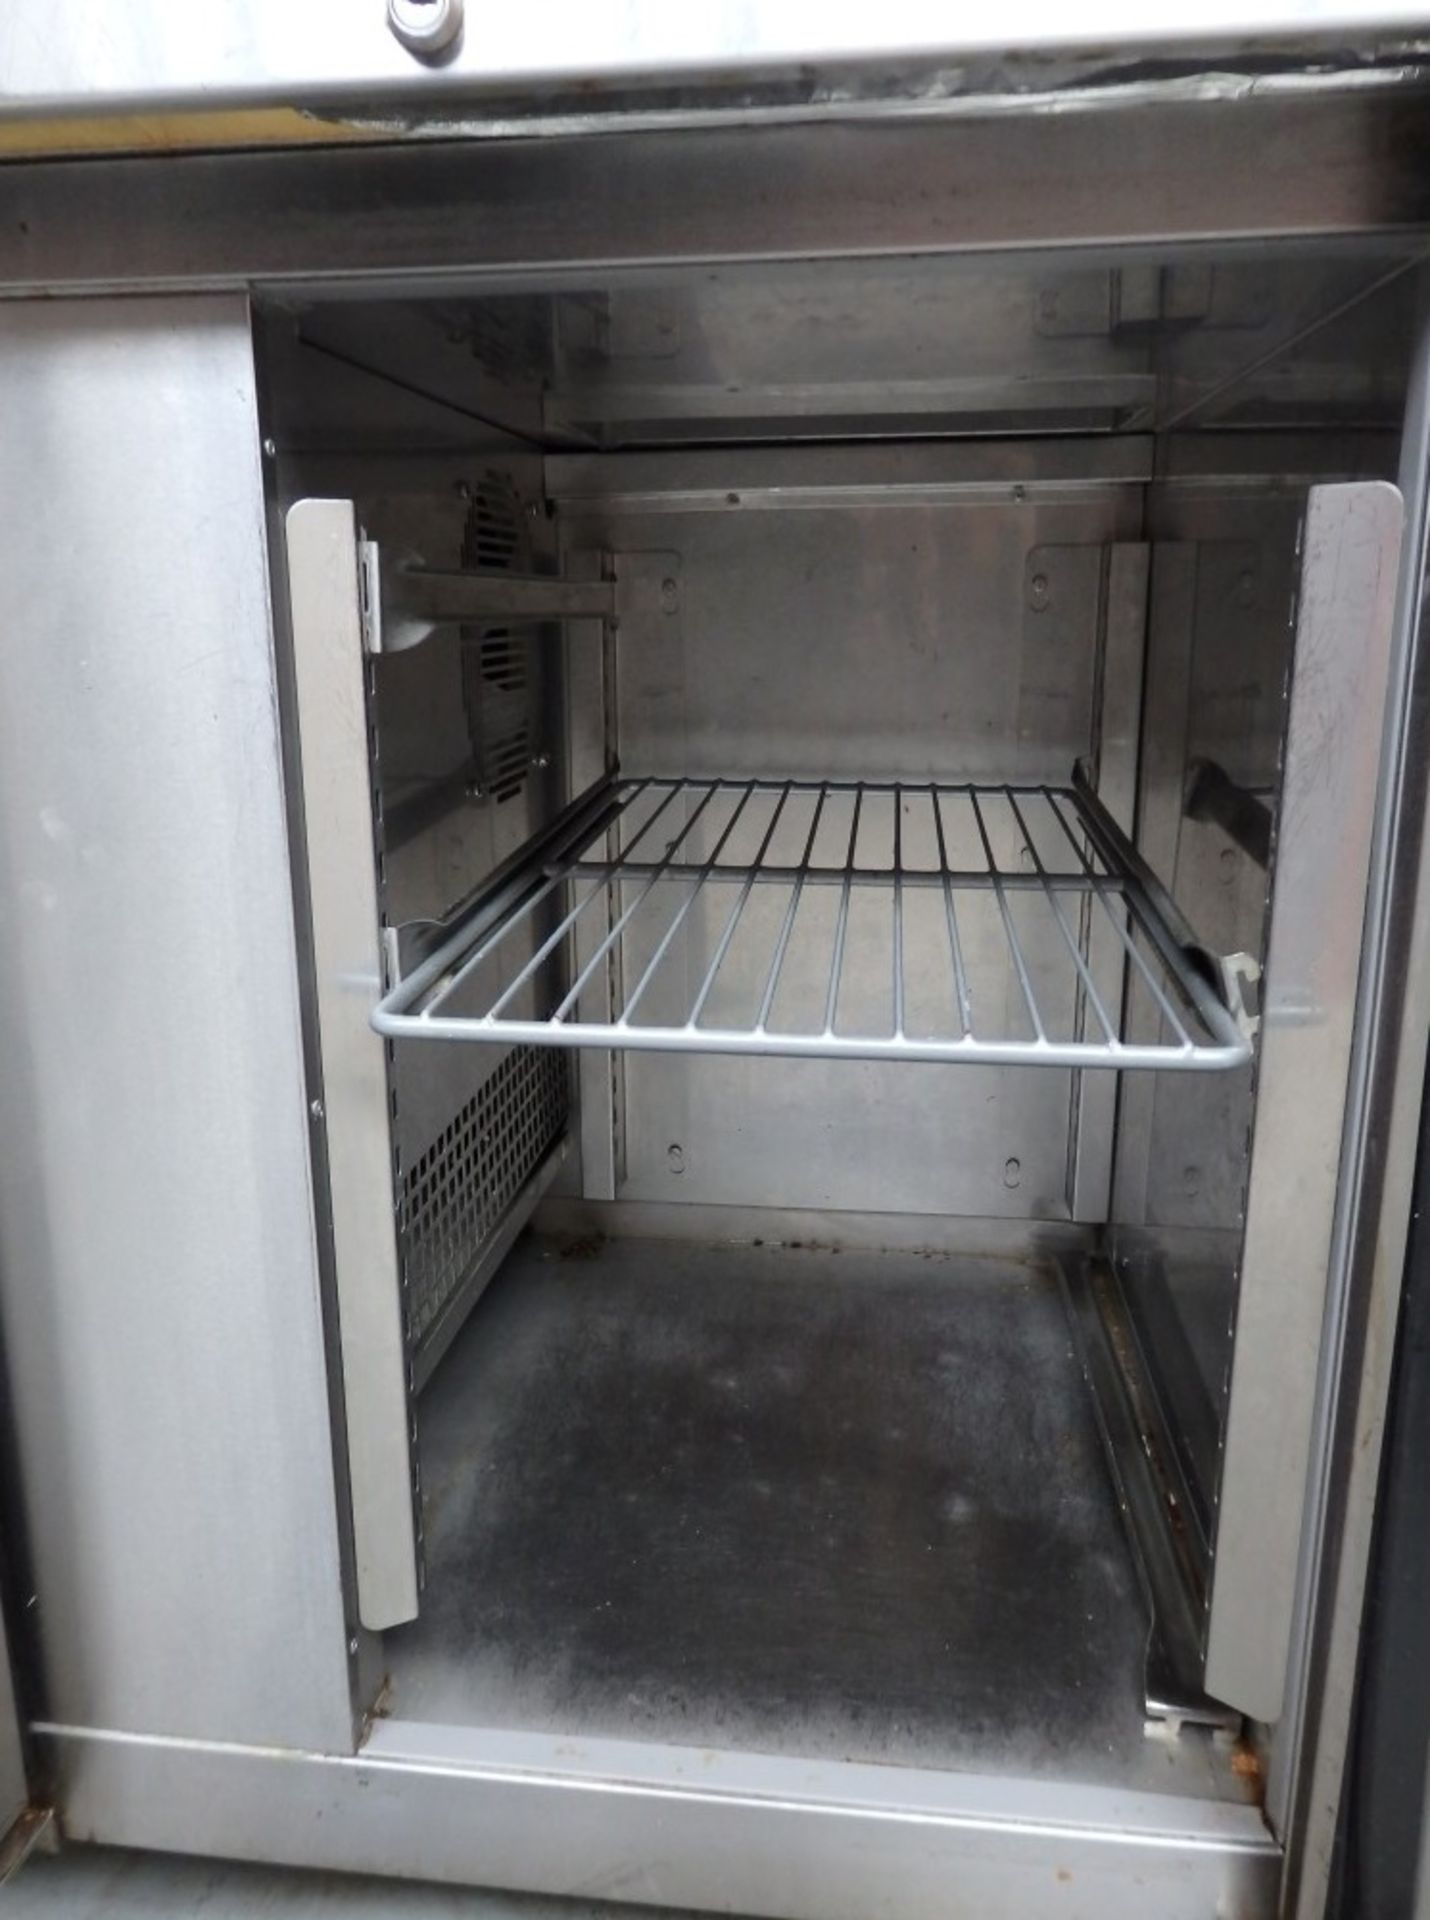 1 x "Precision" Commercial Refrigerator Counter With 3-Door Storage - Model: Gastronorm MCU-311 - - Image 4 of 12